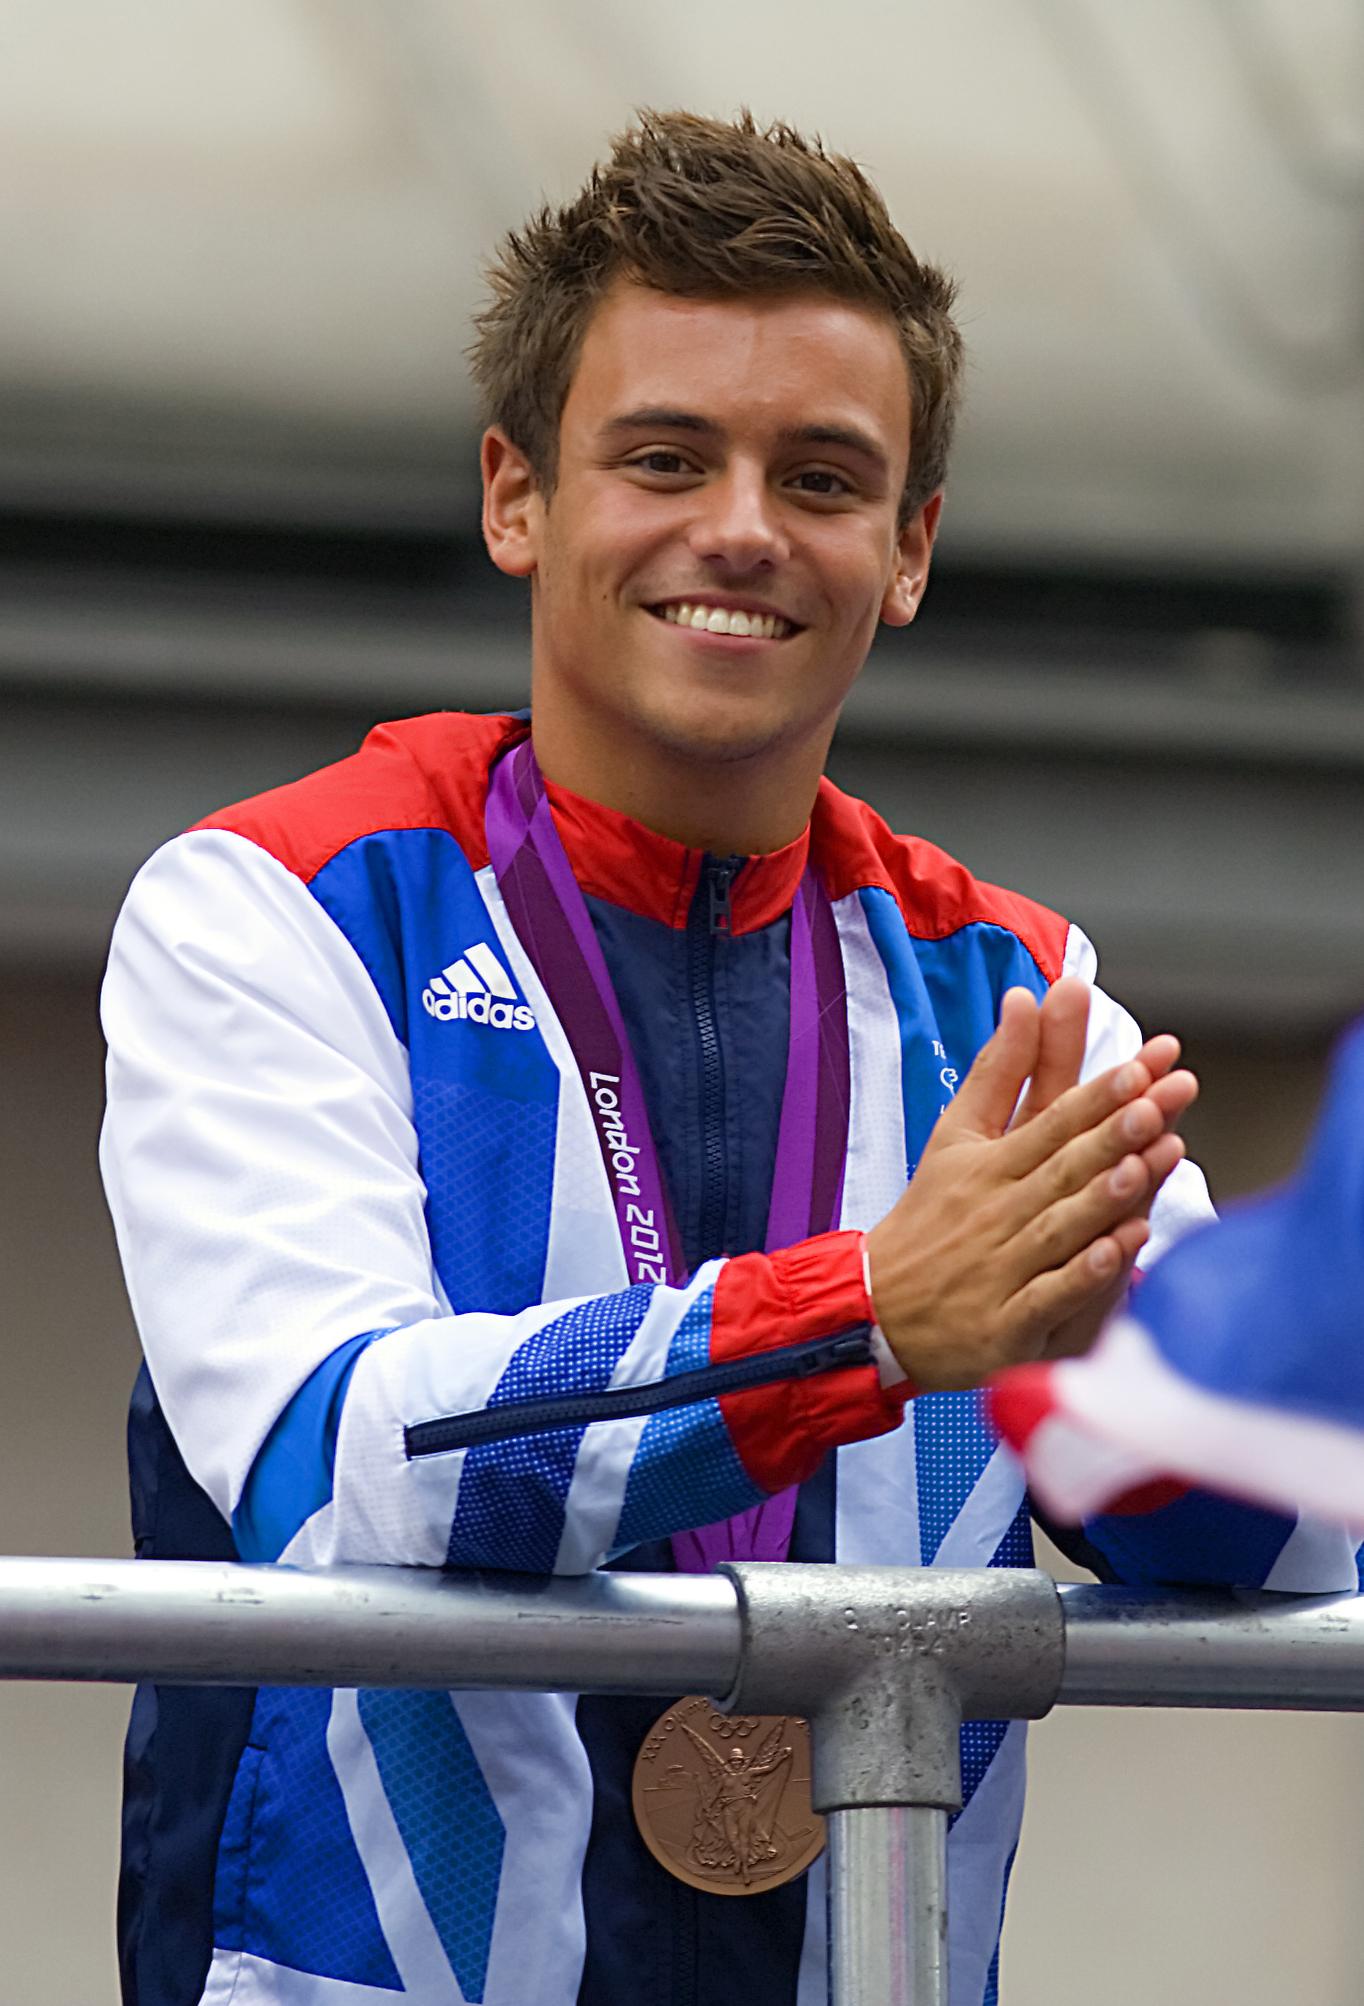 Please join me next Thursday in wishing openly gay and British Olympian Tom Daley a happy 21st birthday! 